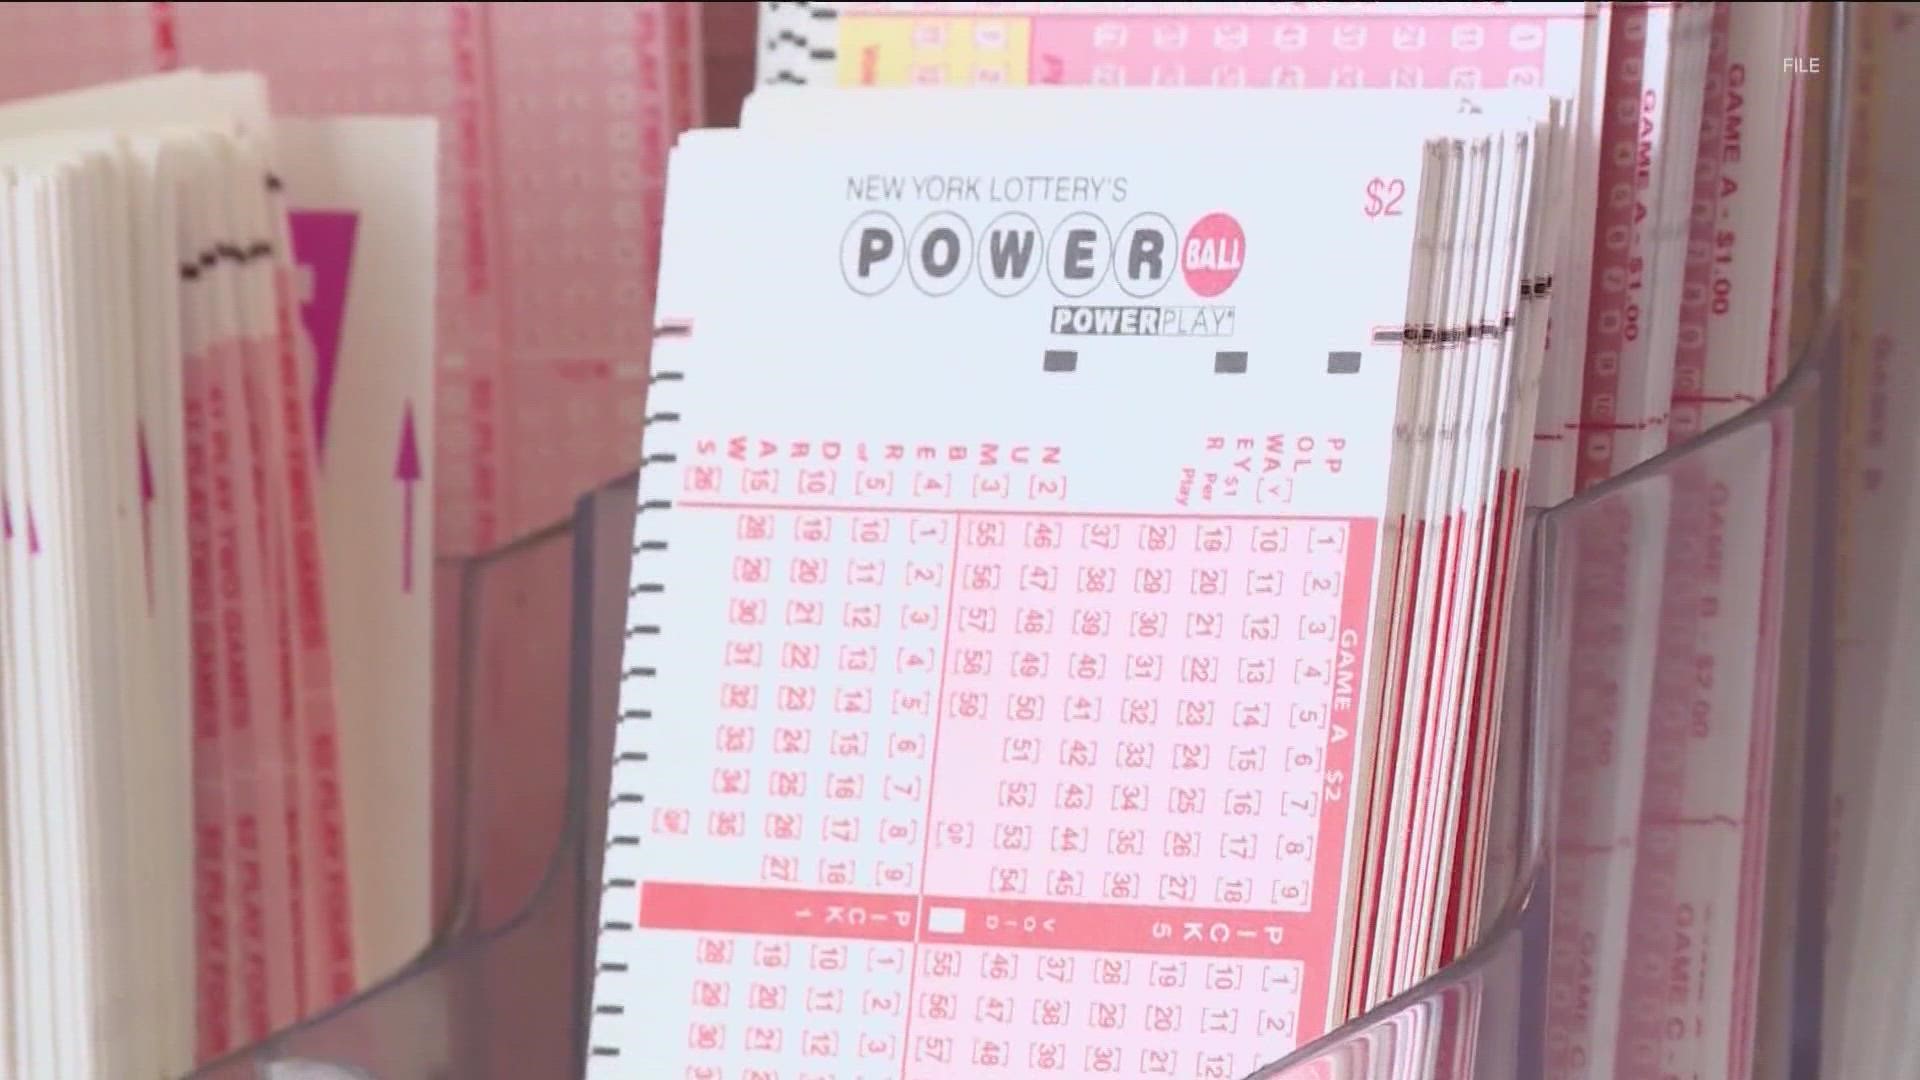 The winning ticket was sold at an H-E-B in North Austin.